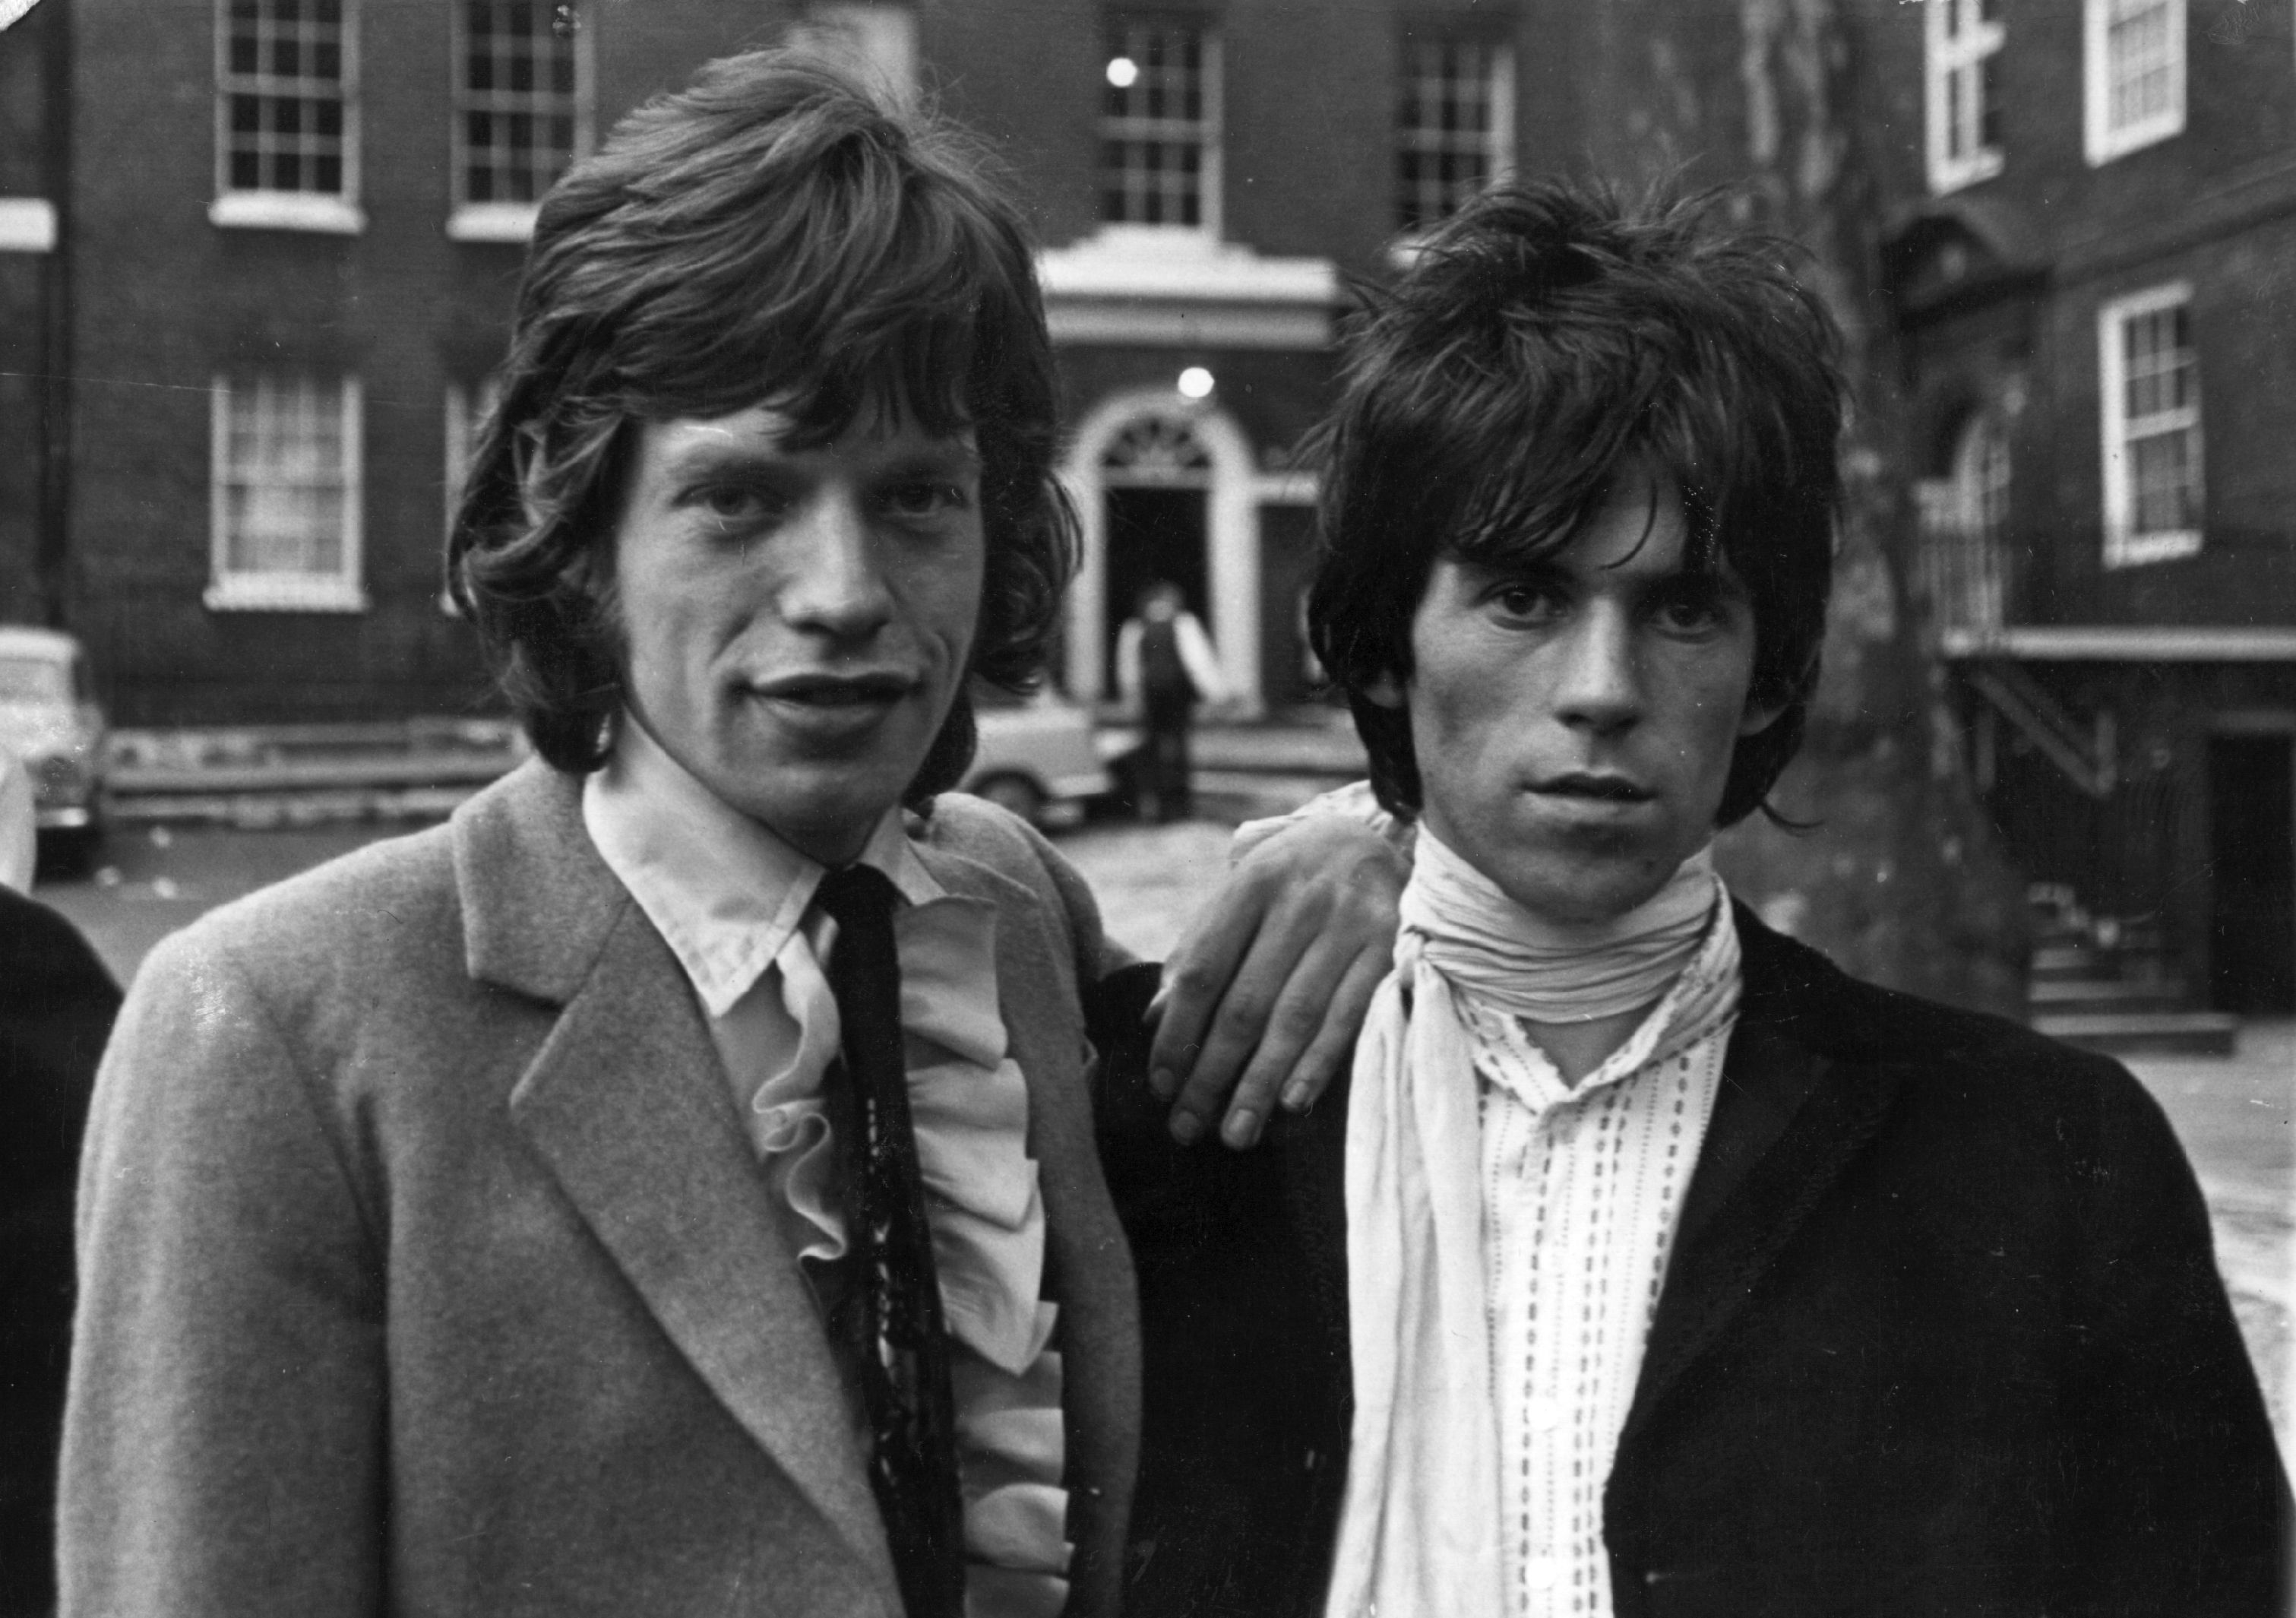 The Rolling Stones' Mick Jagger and Keith Richards wearing suits